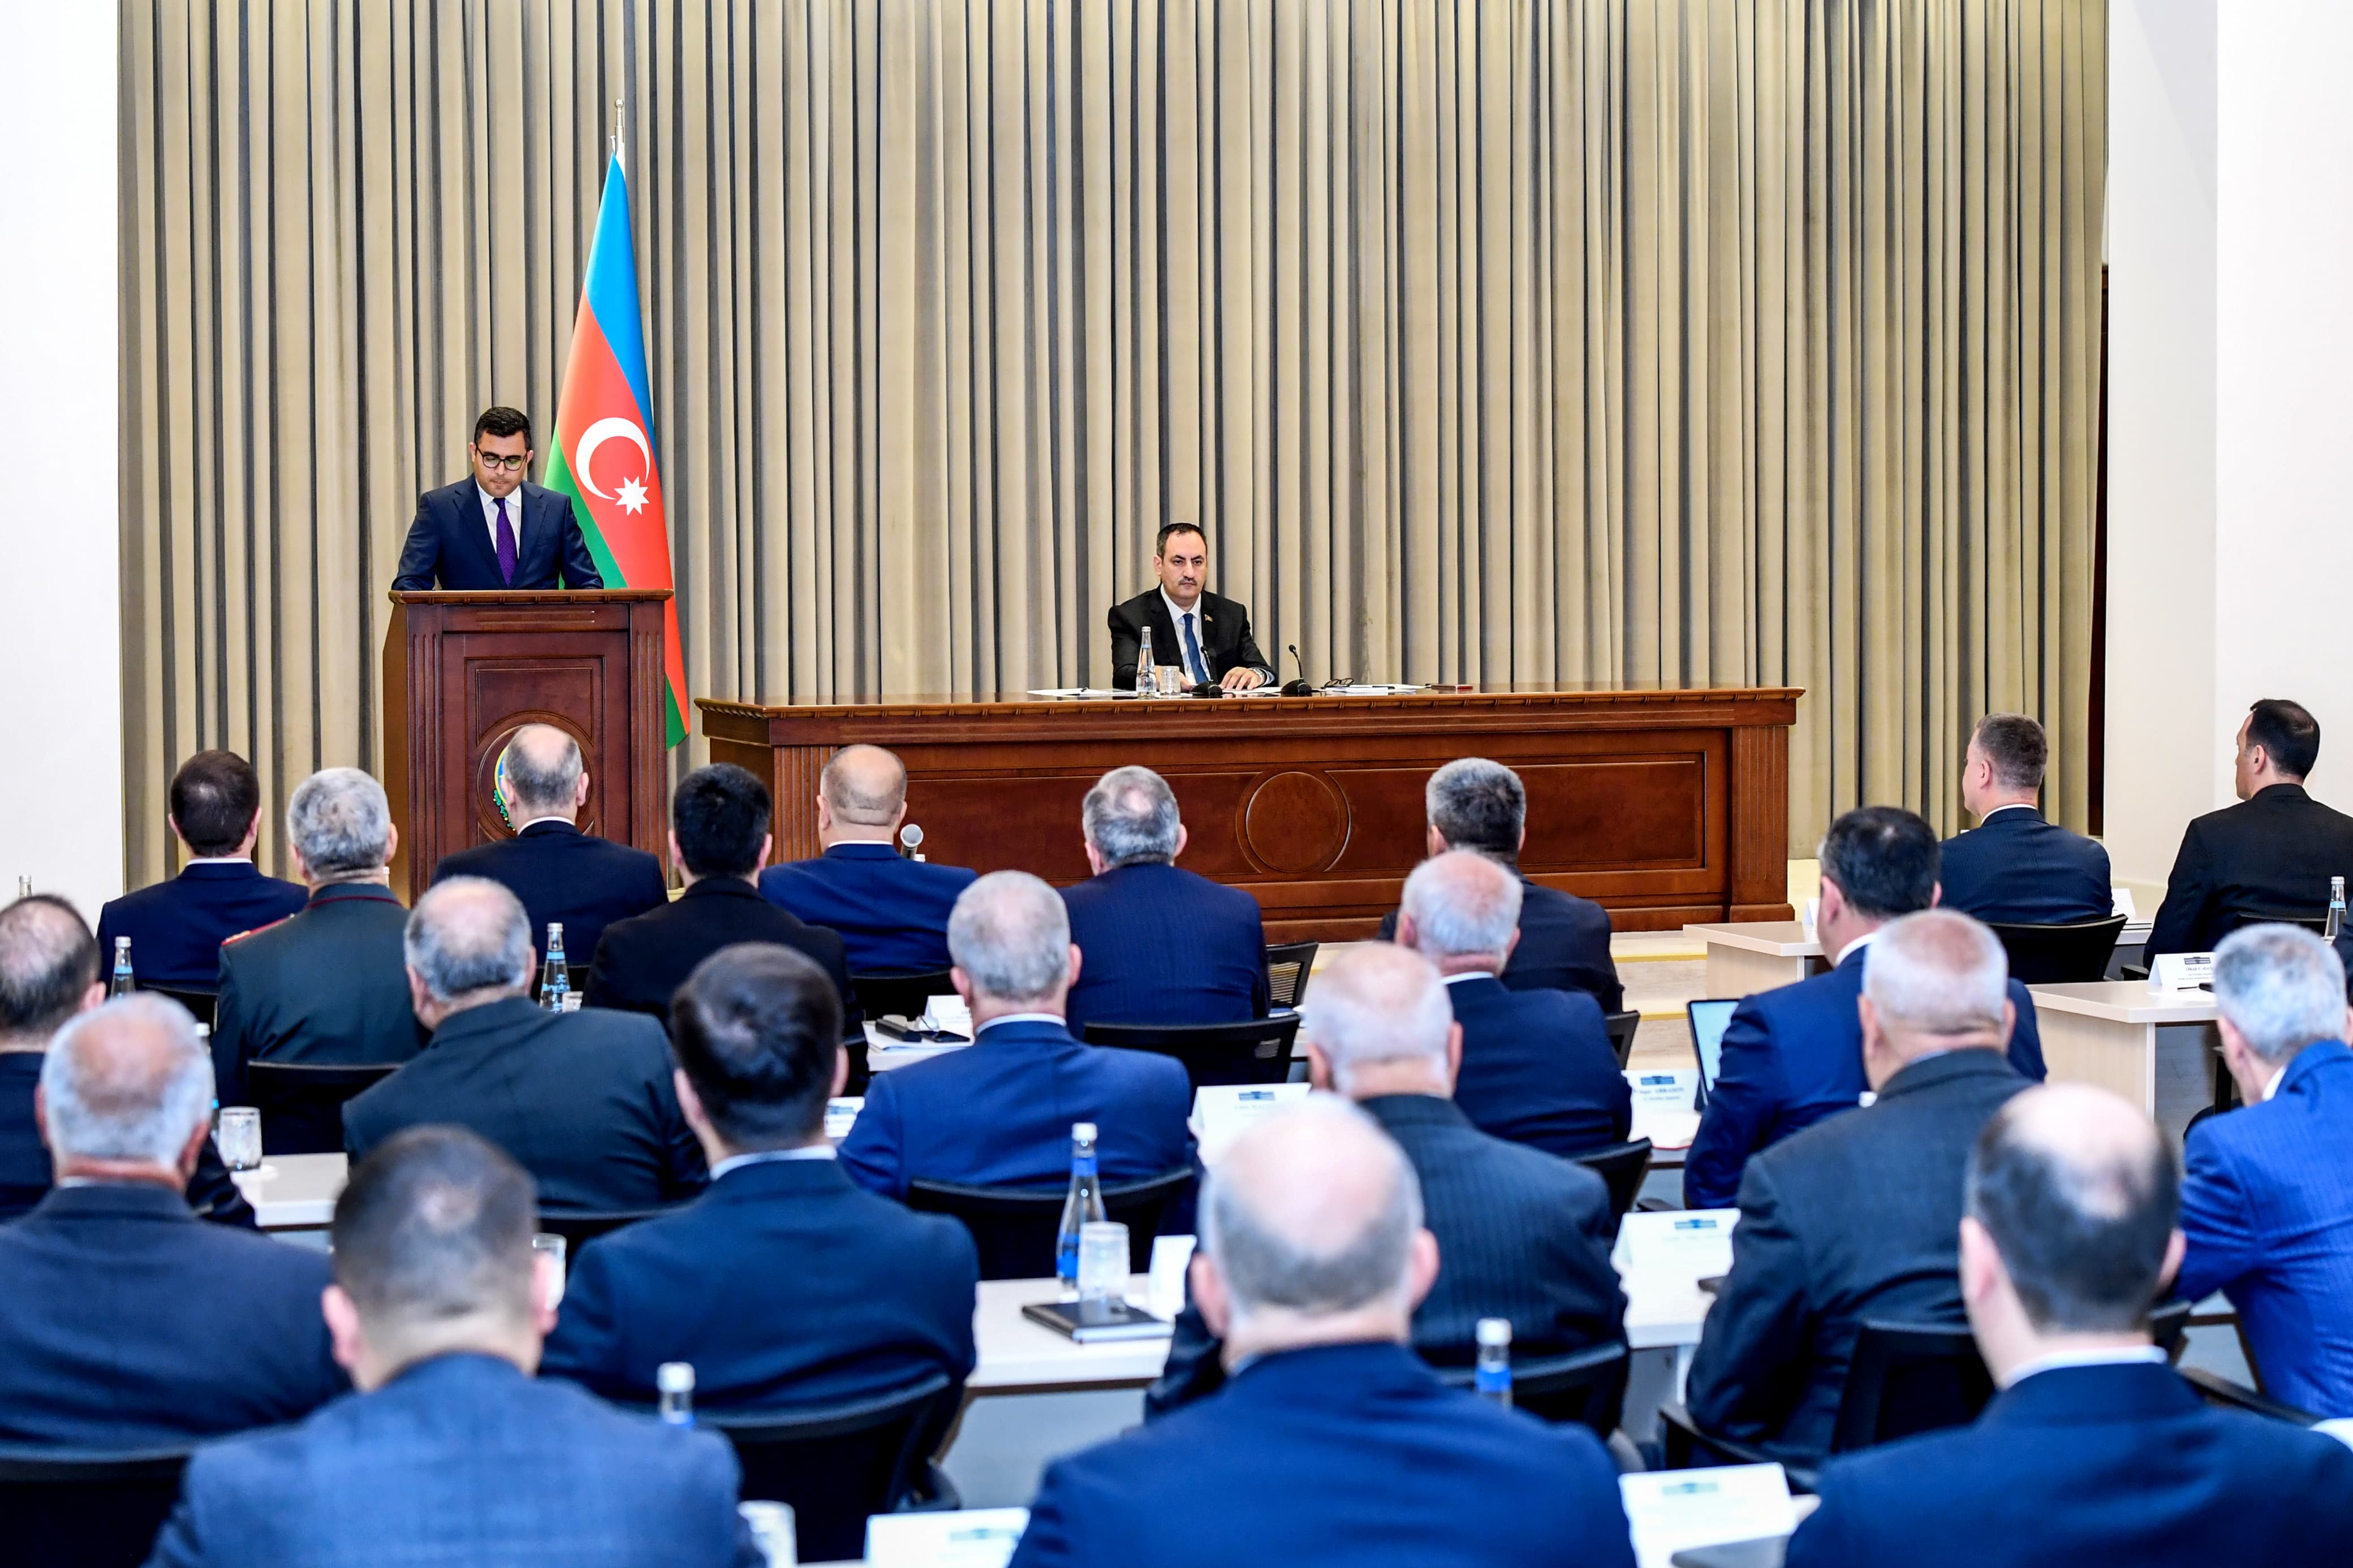 Ali Majlis (Parliament) of the Nakhchivan Autonomous Republic has adopted the report of the Government